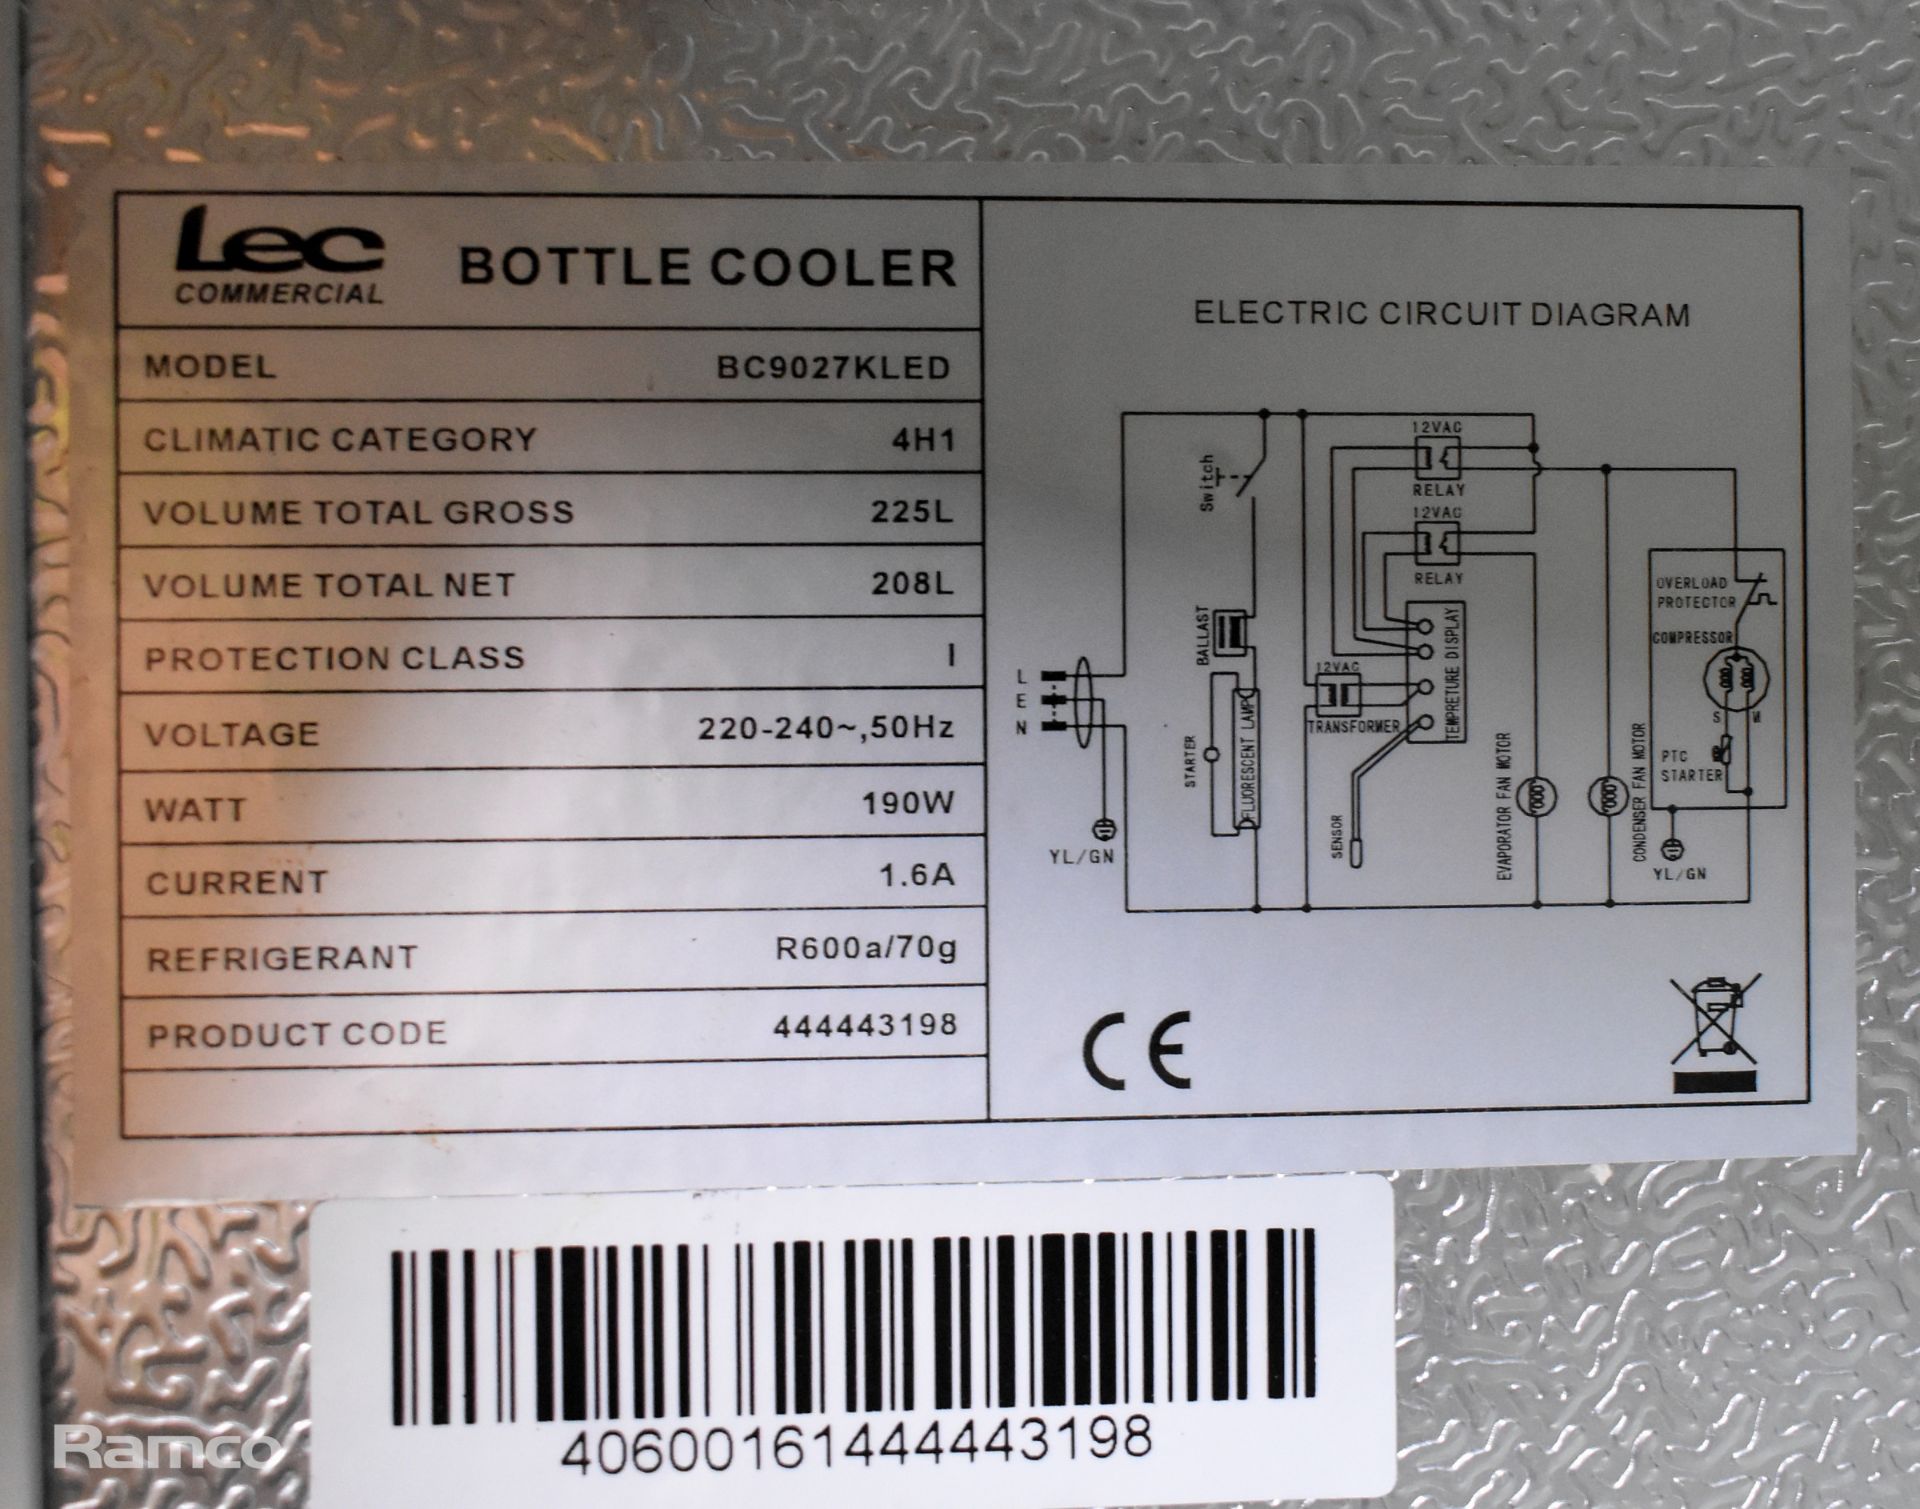 LEC BC9027KLED bottle cooler - 220/240V 50Hz - L 900 x W 510 x H 900mm - Image 4 of 5